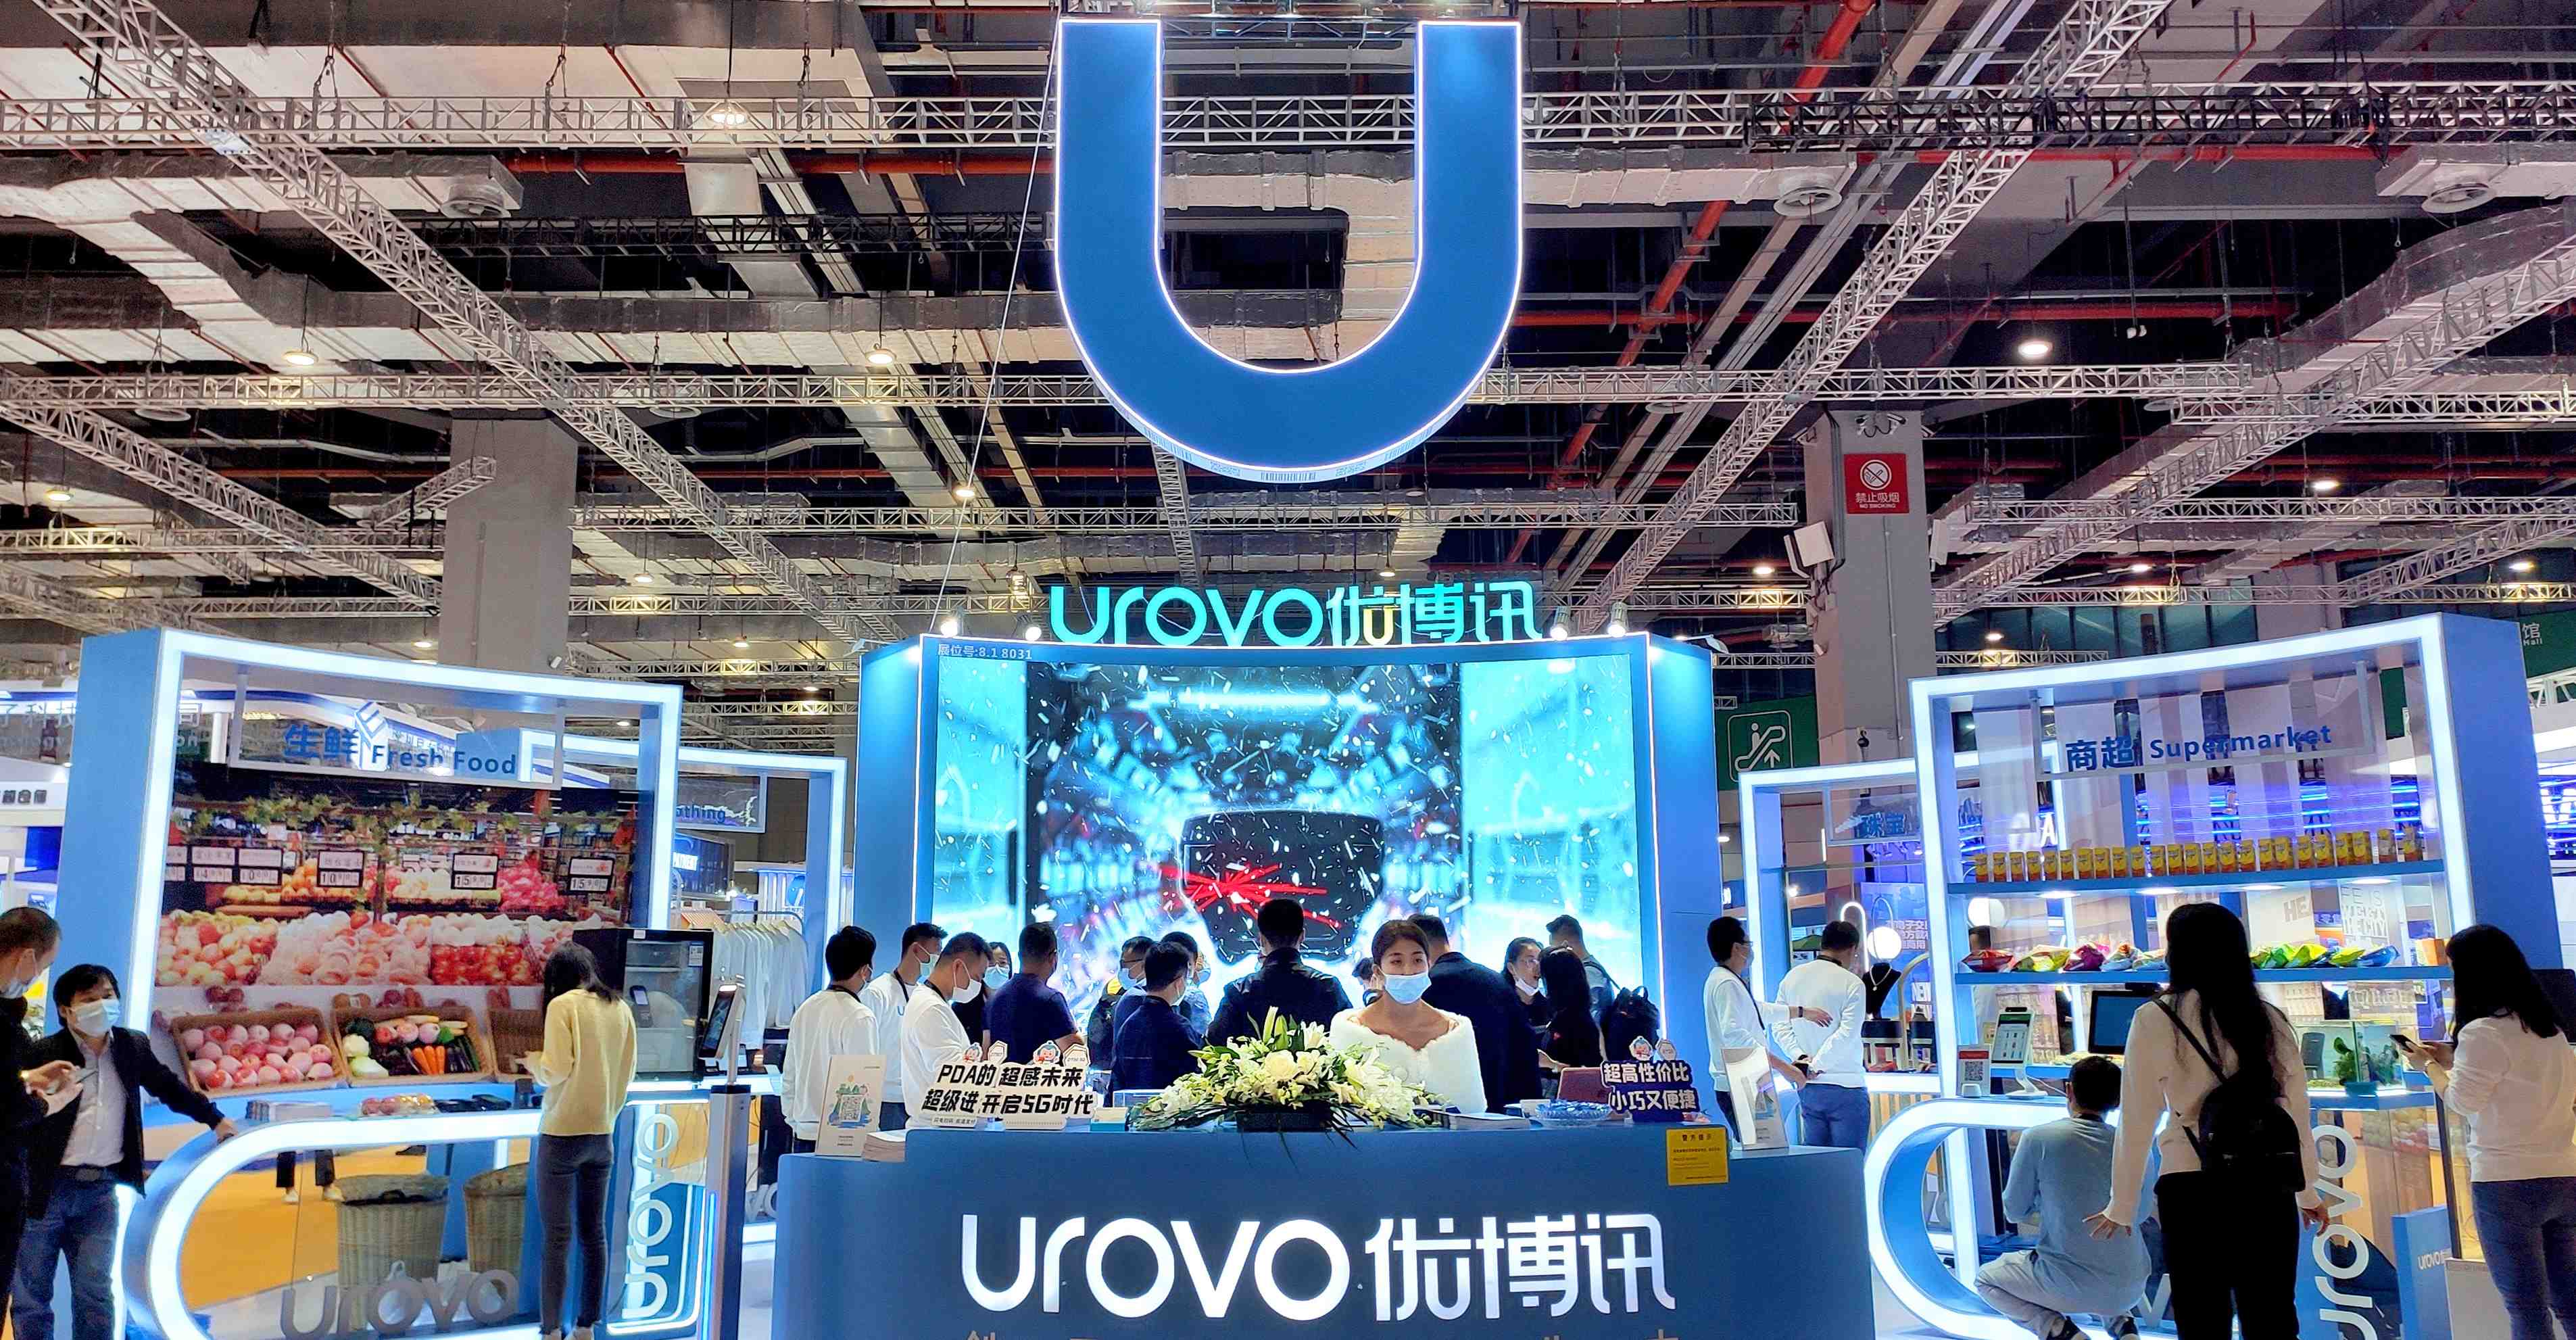 CHINASHOP: A spectacular rollout for Unovo’s new 5G products